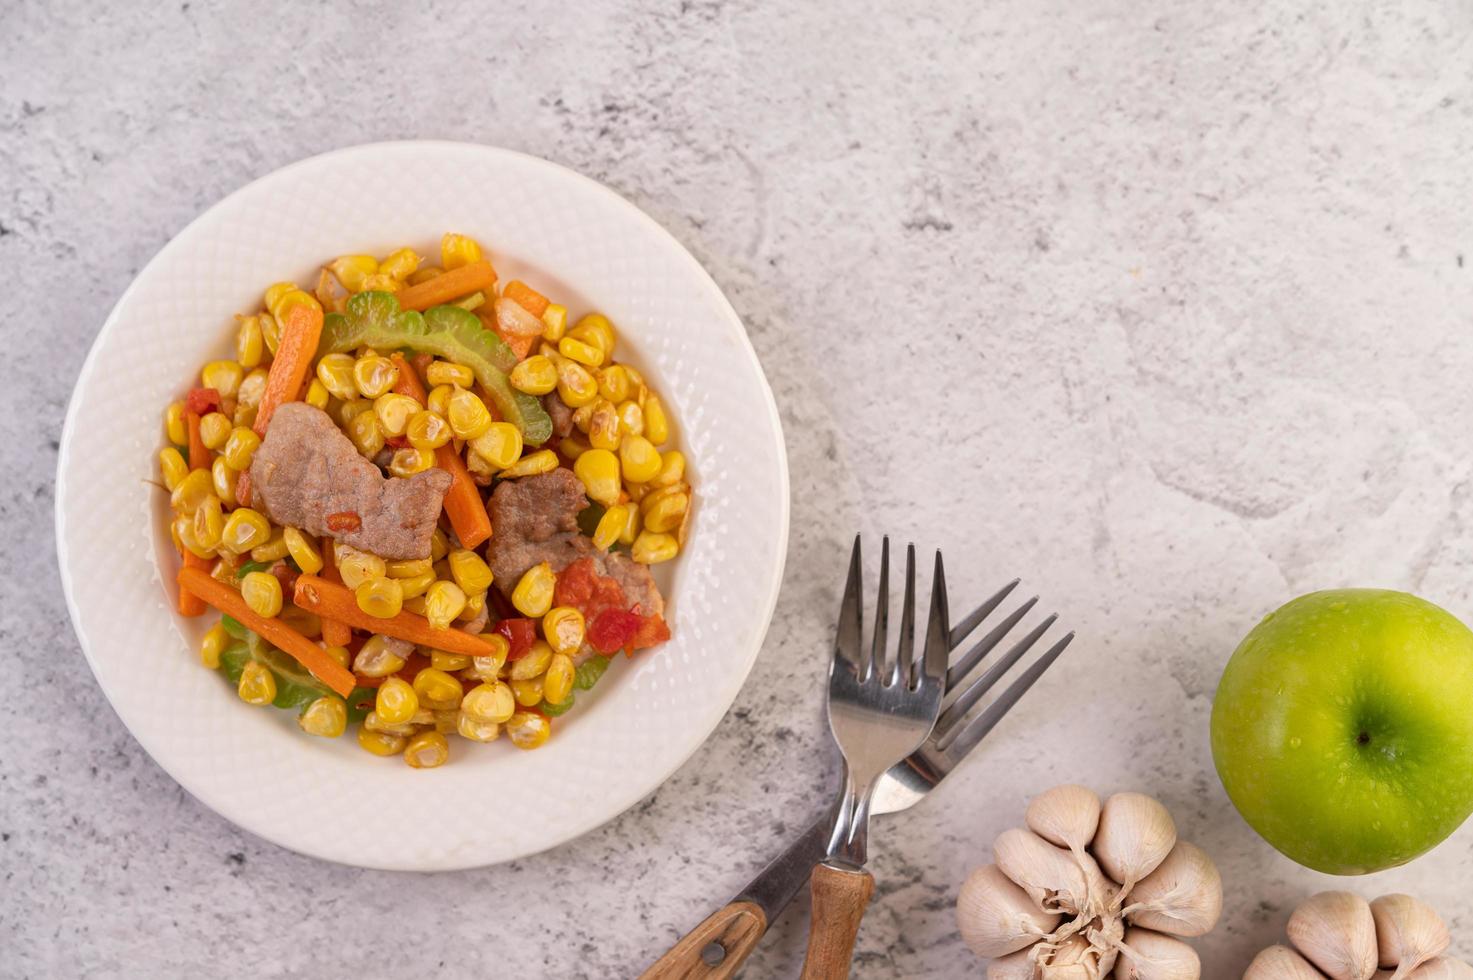 Pork dish with carrots and corn photo